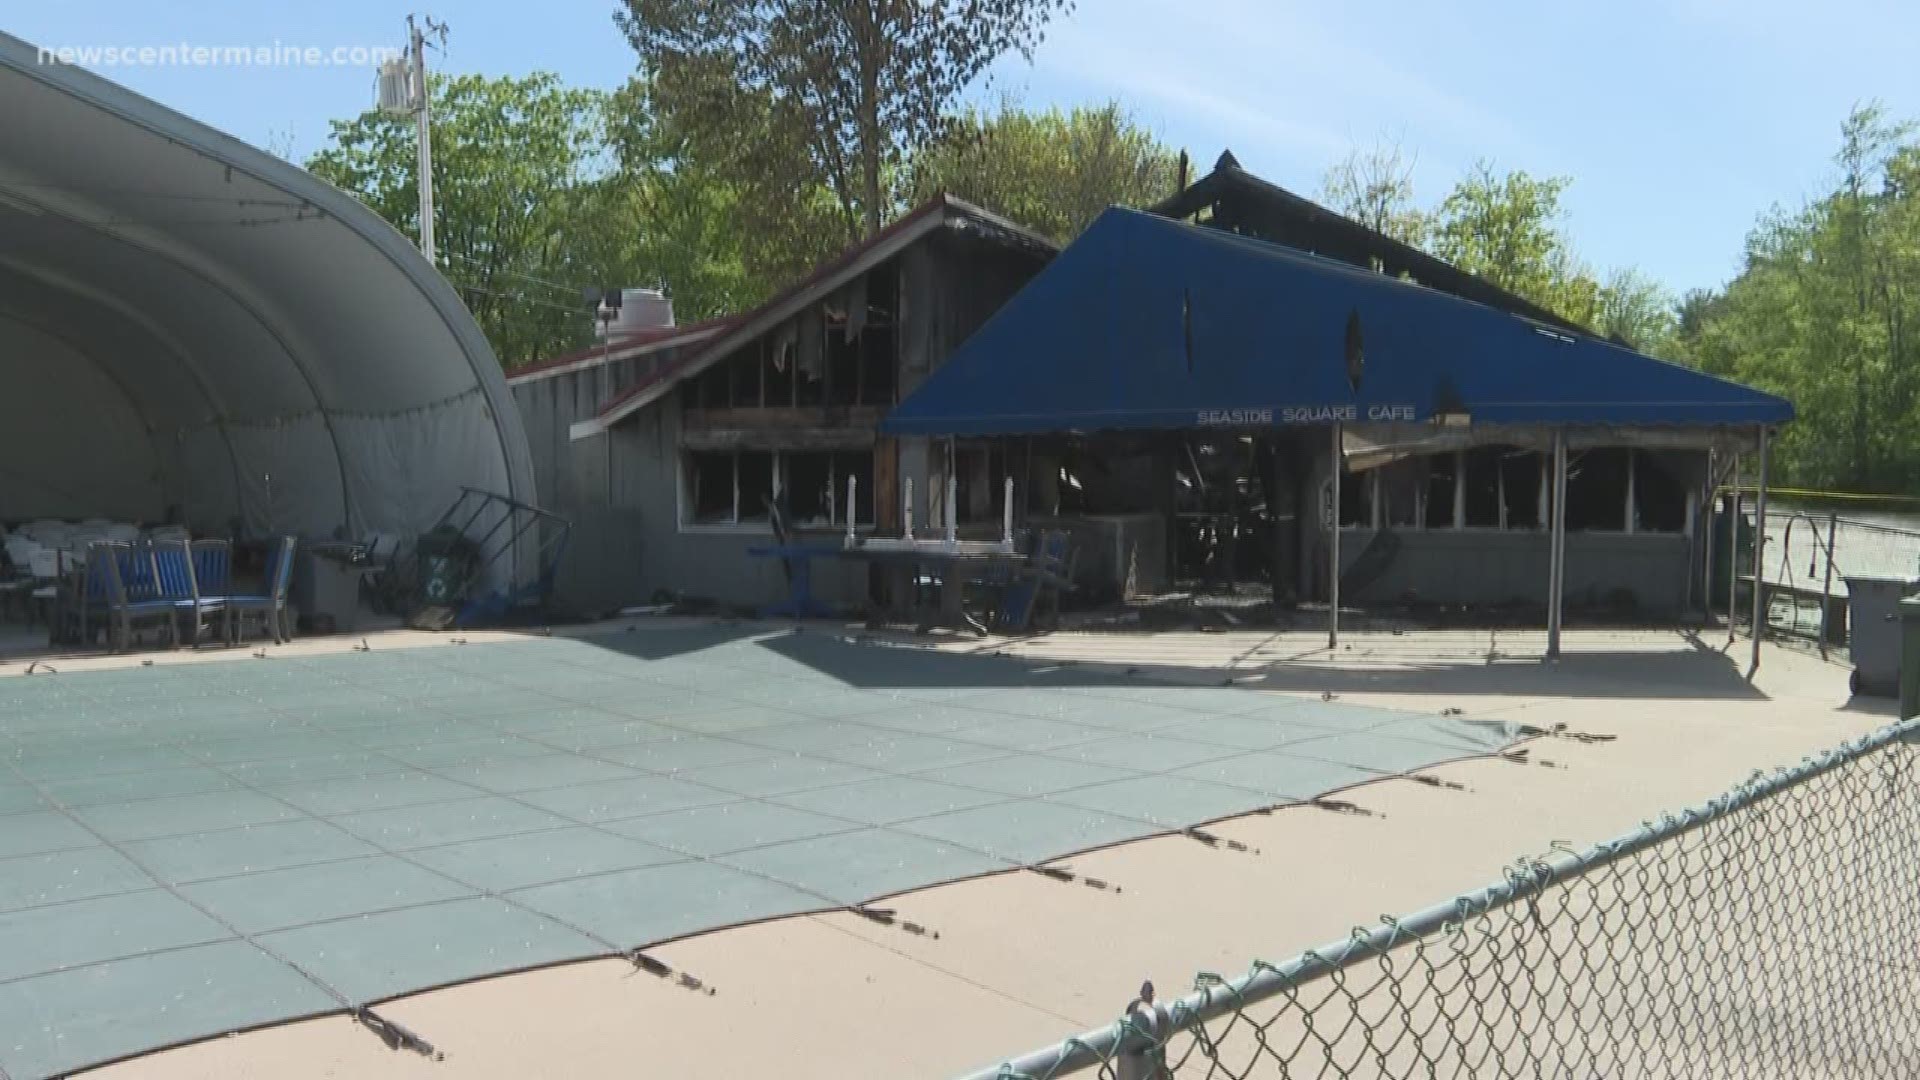 The Scarborough community is joining together to support the owners of Bayley's Camping Resort, which lost a major building to a fire Tuesday.